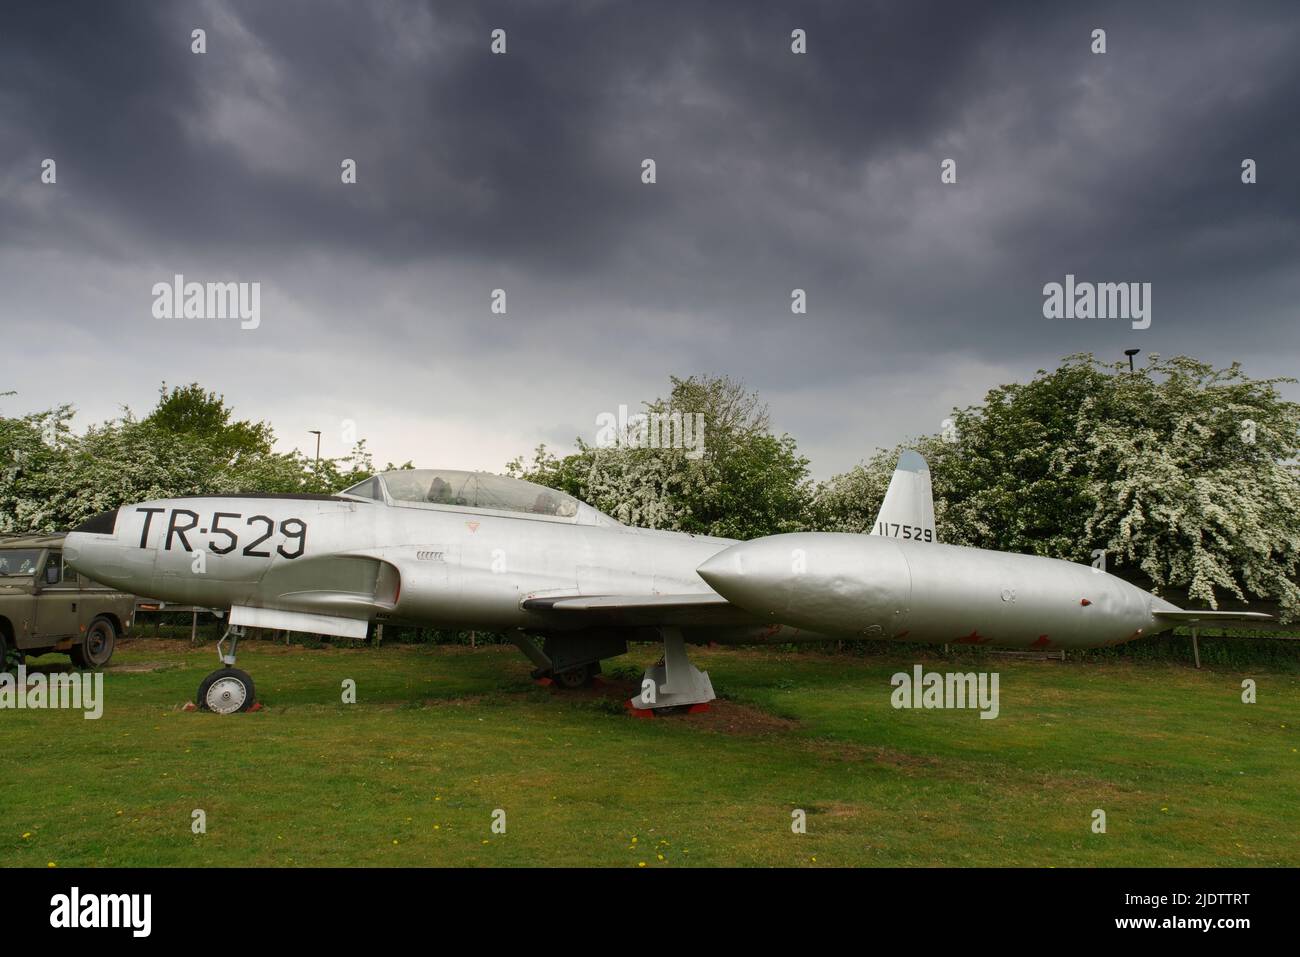 Lockheed T-33 Shooting Star, Midland Air Museum, Coventry, Banque D'Images